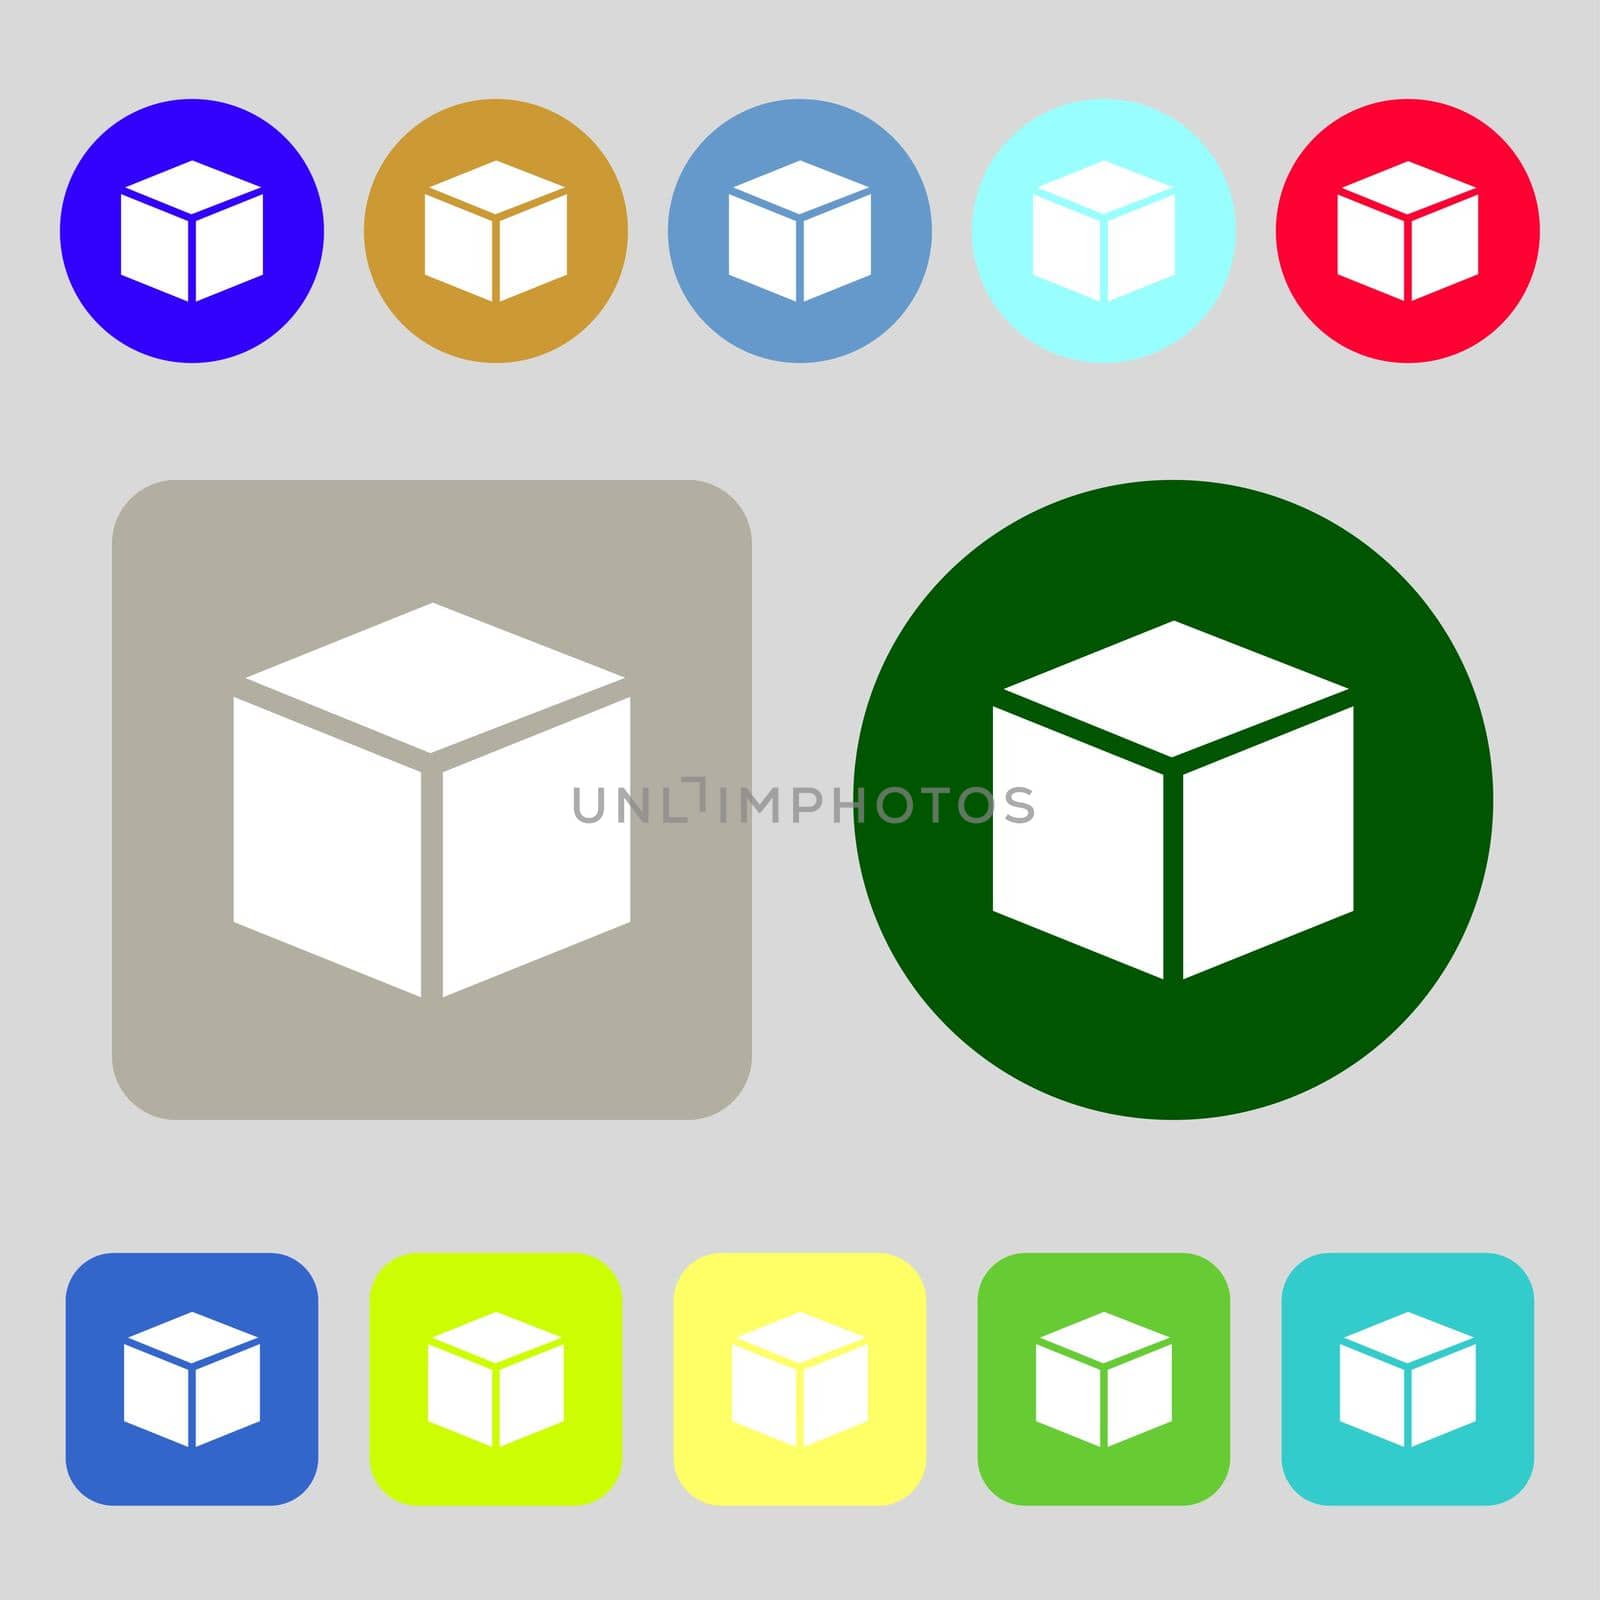 3d cube icon sign. 12 colored buttons. Flat design.  by serhii_lohvyniuk